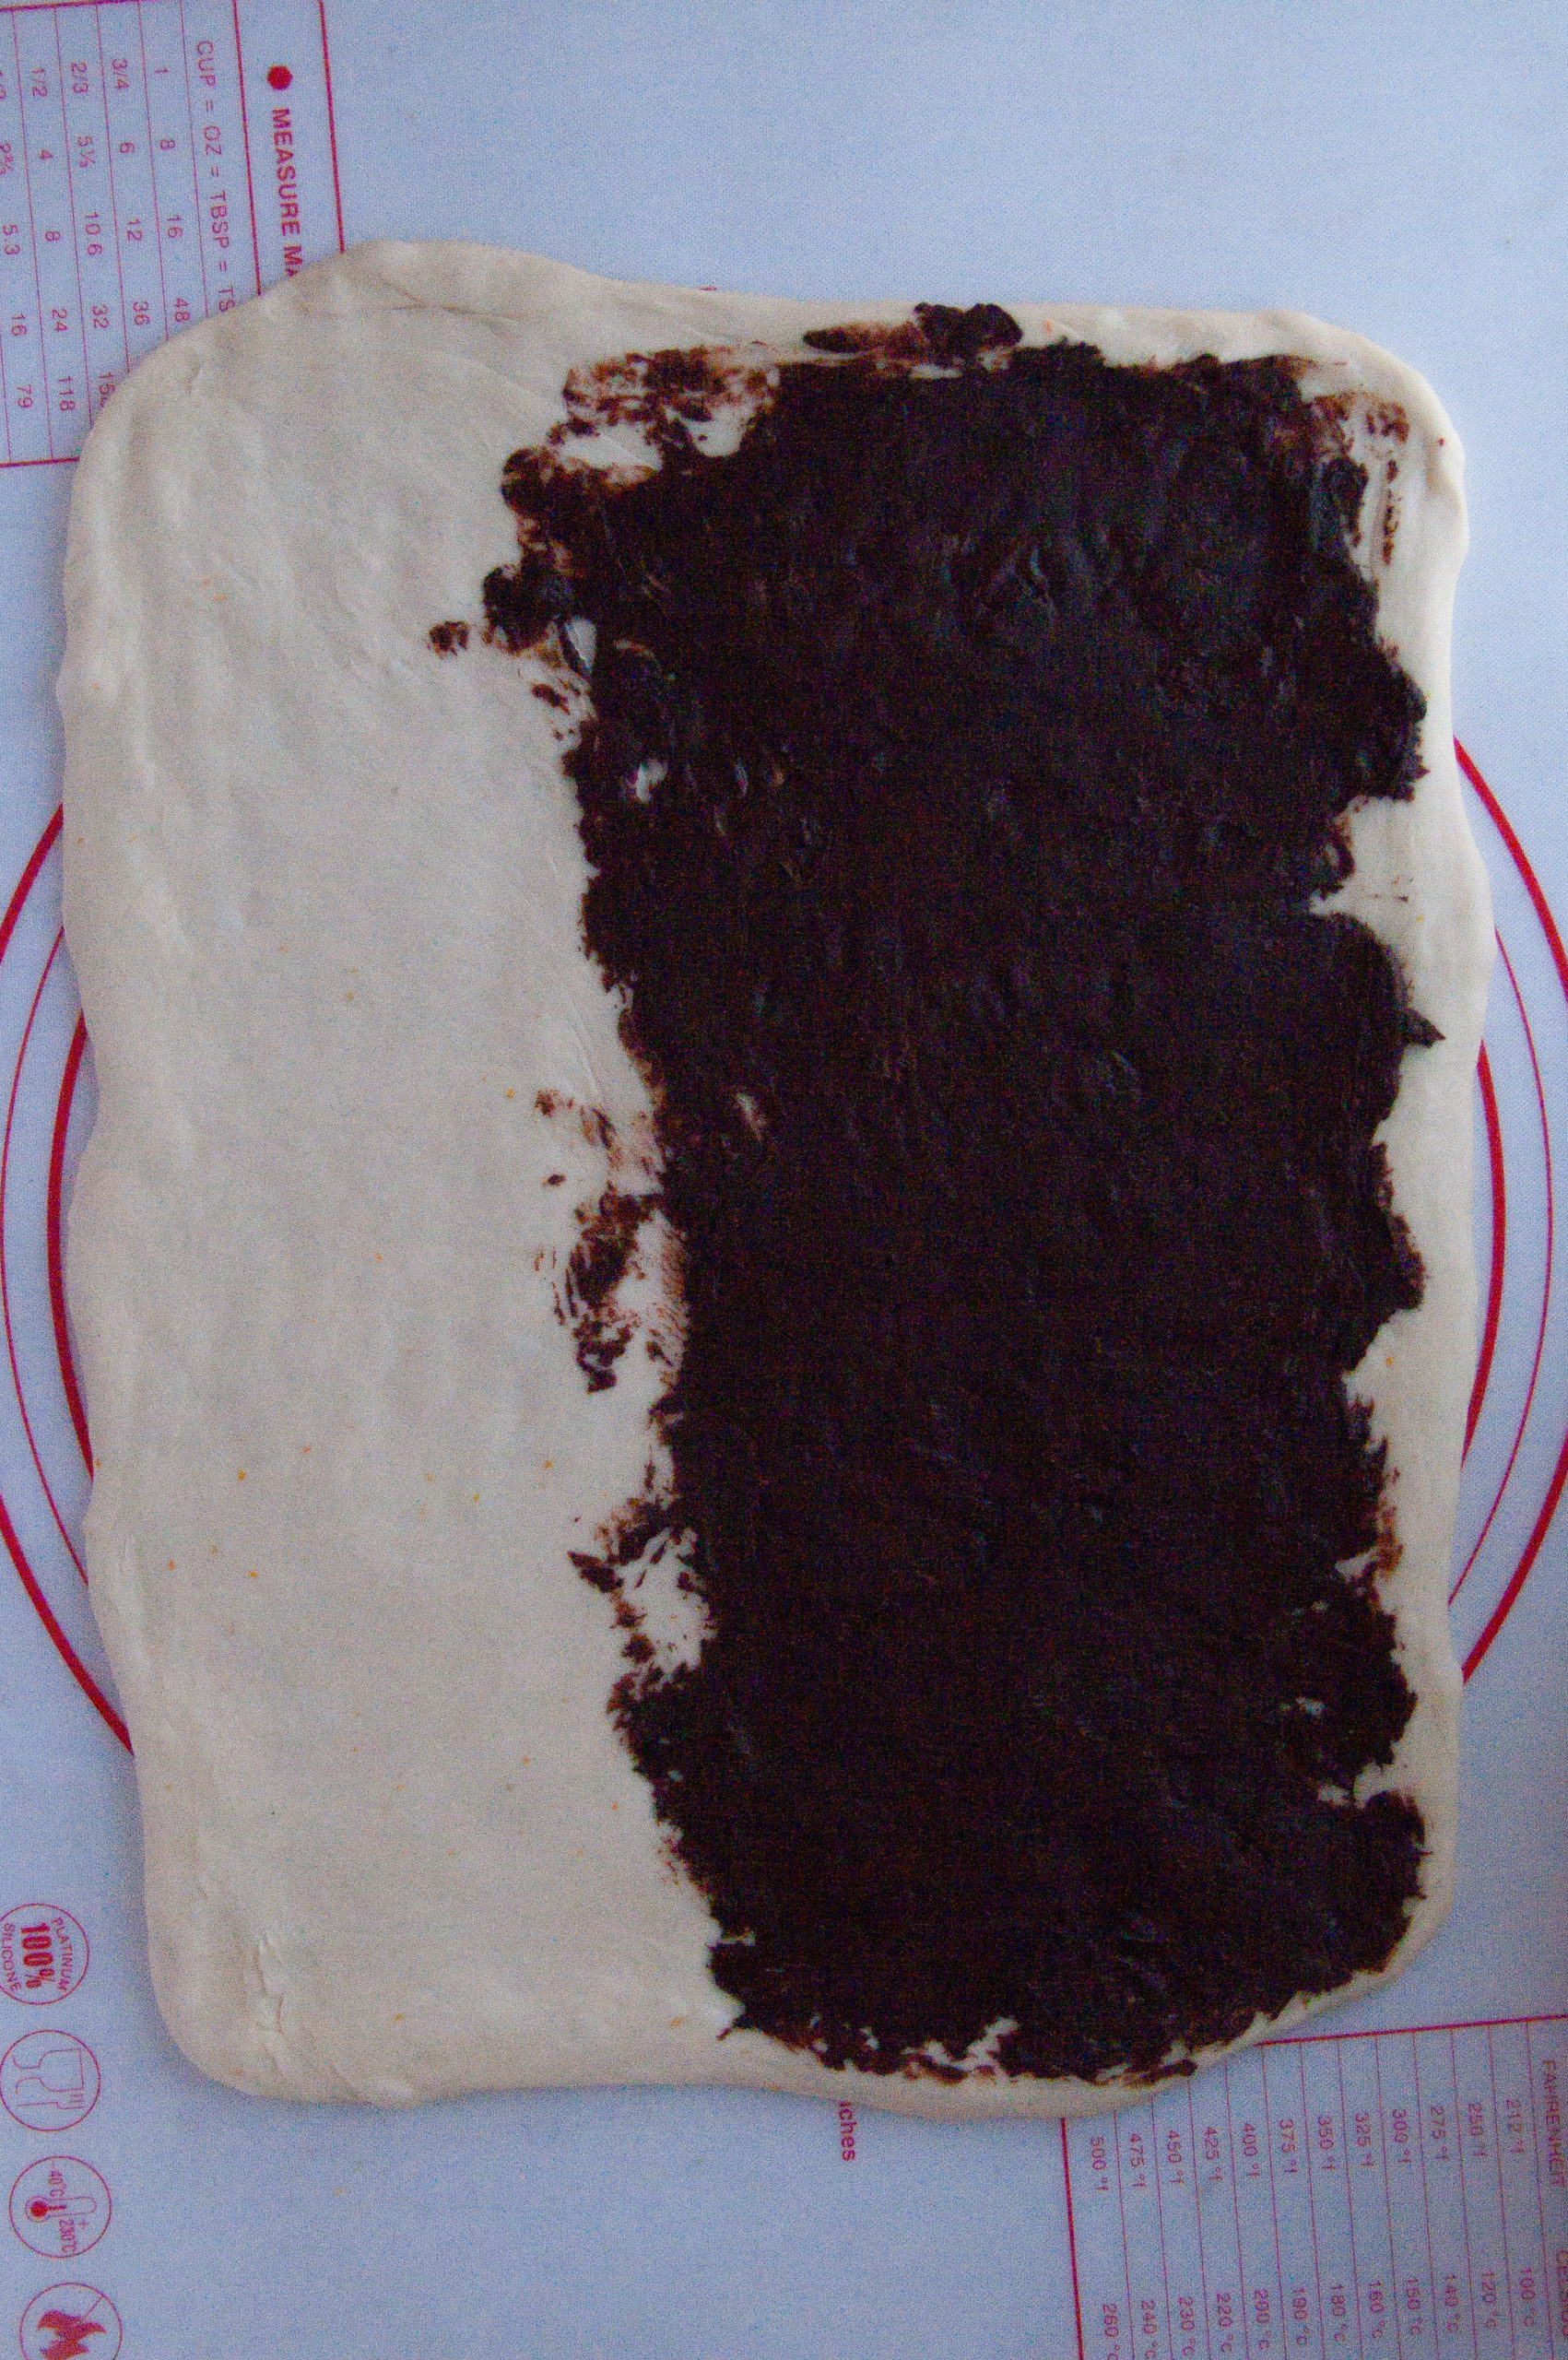 rolled out bun dough with chocolate filling spread onto it